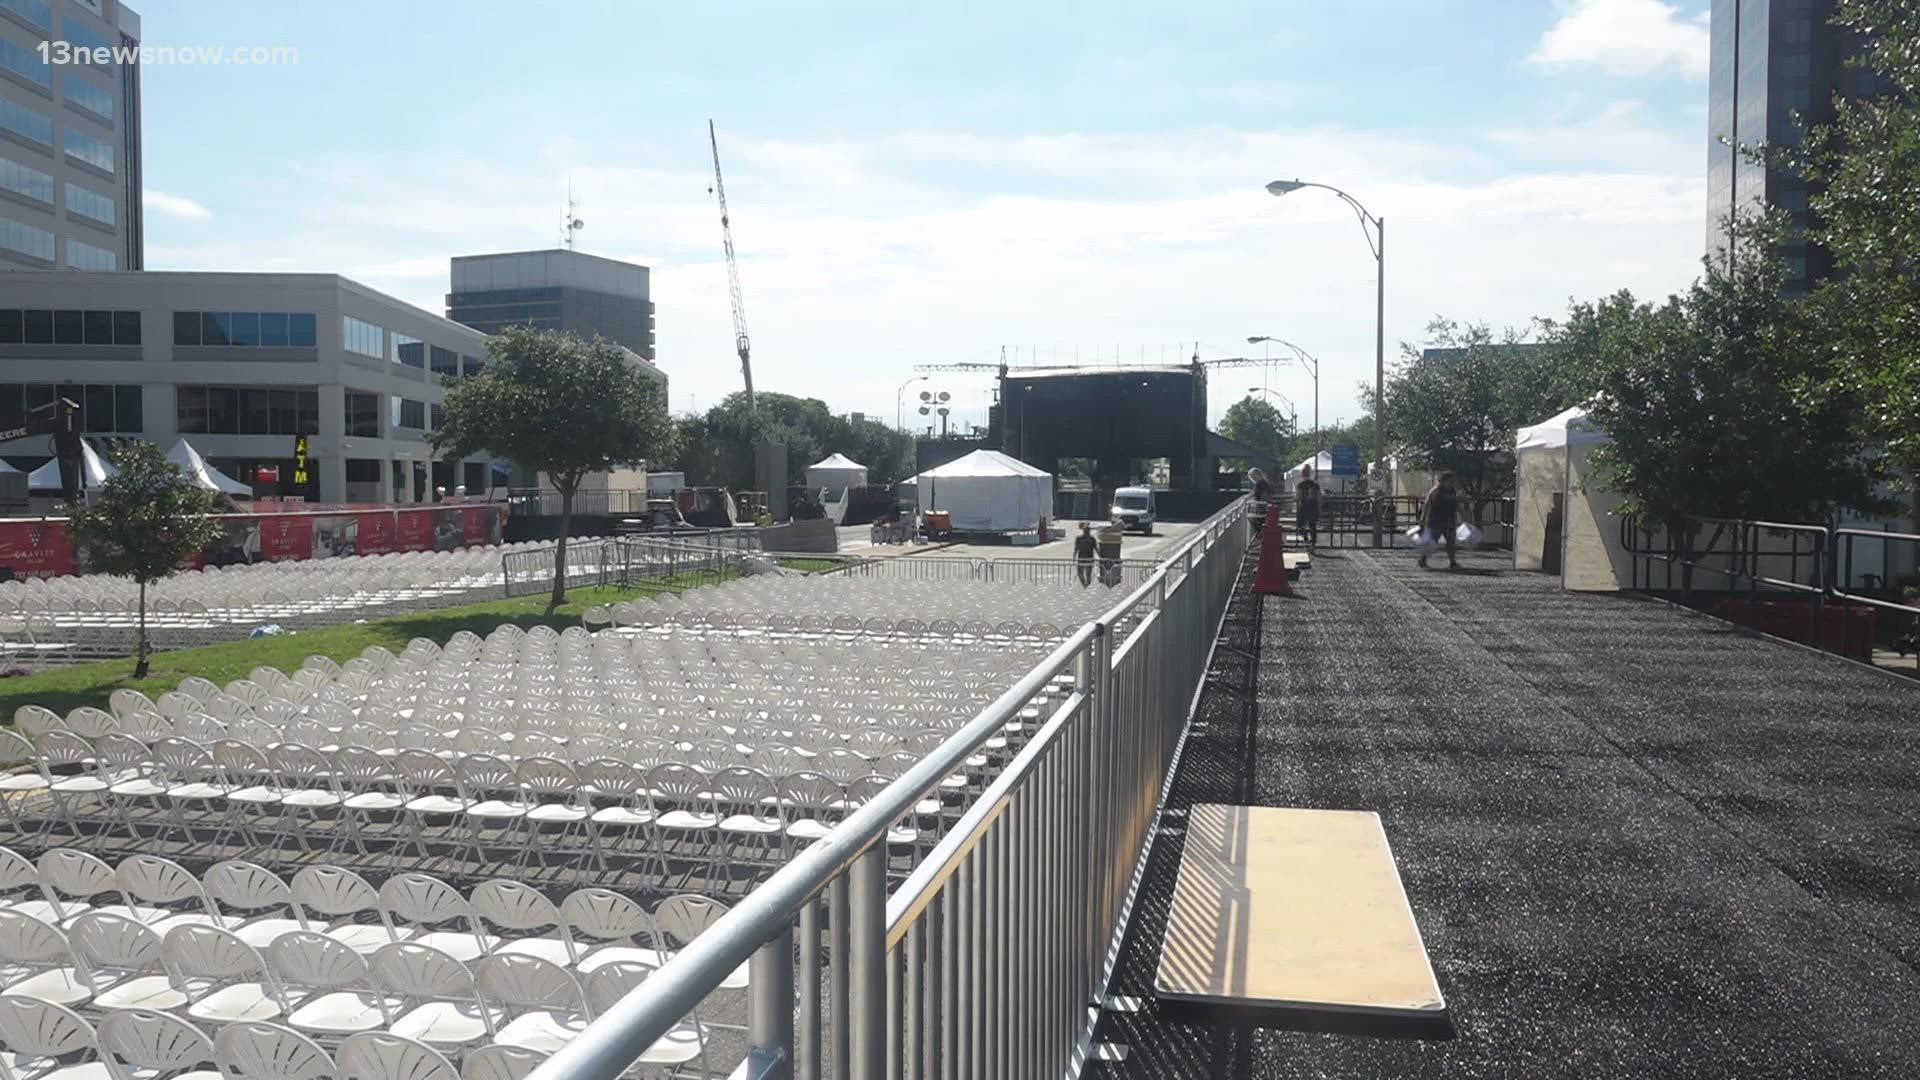 Crews shut down the waterfront roadway to make way for a massive stage right in the middle, with I-264 as a backdrop.